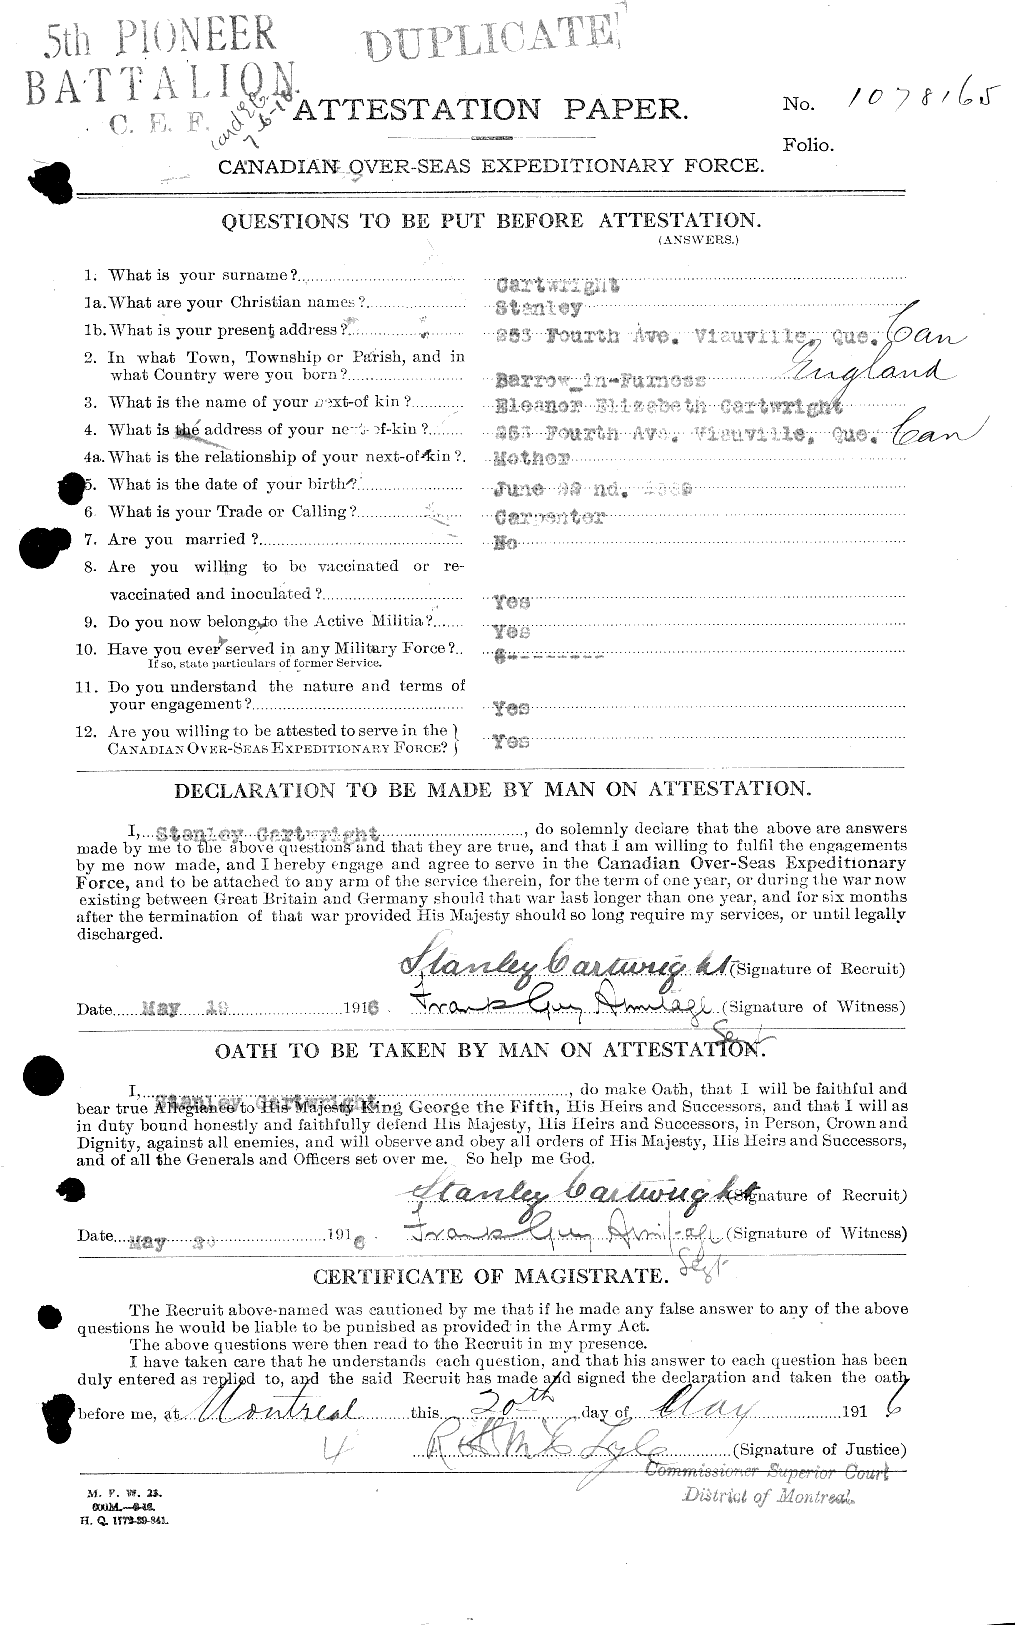 Personnel Records of the First World War - CEF 011621a